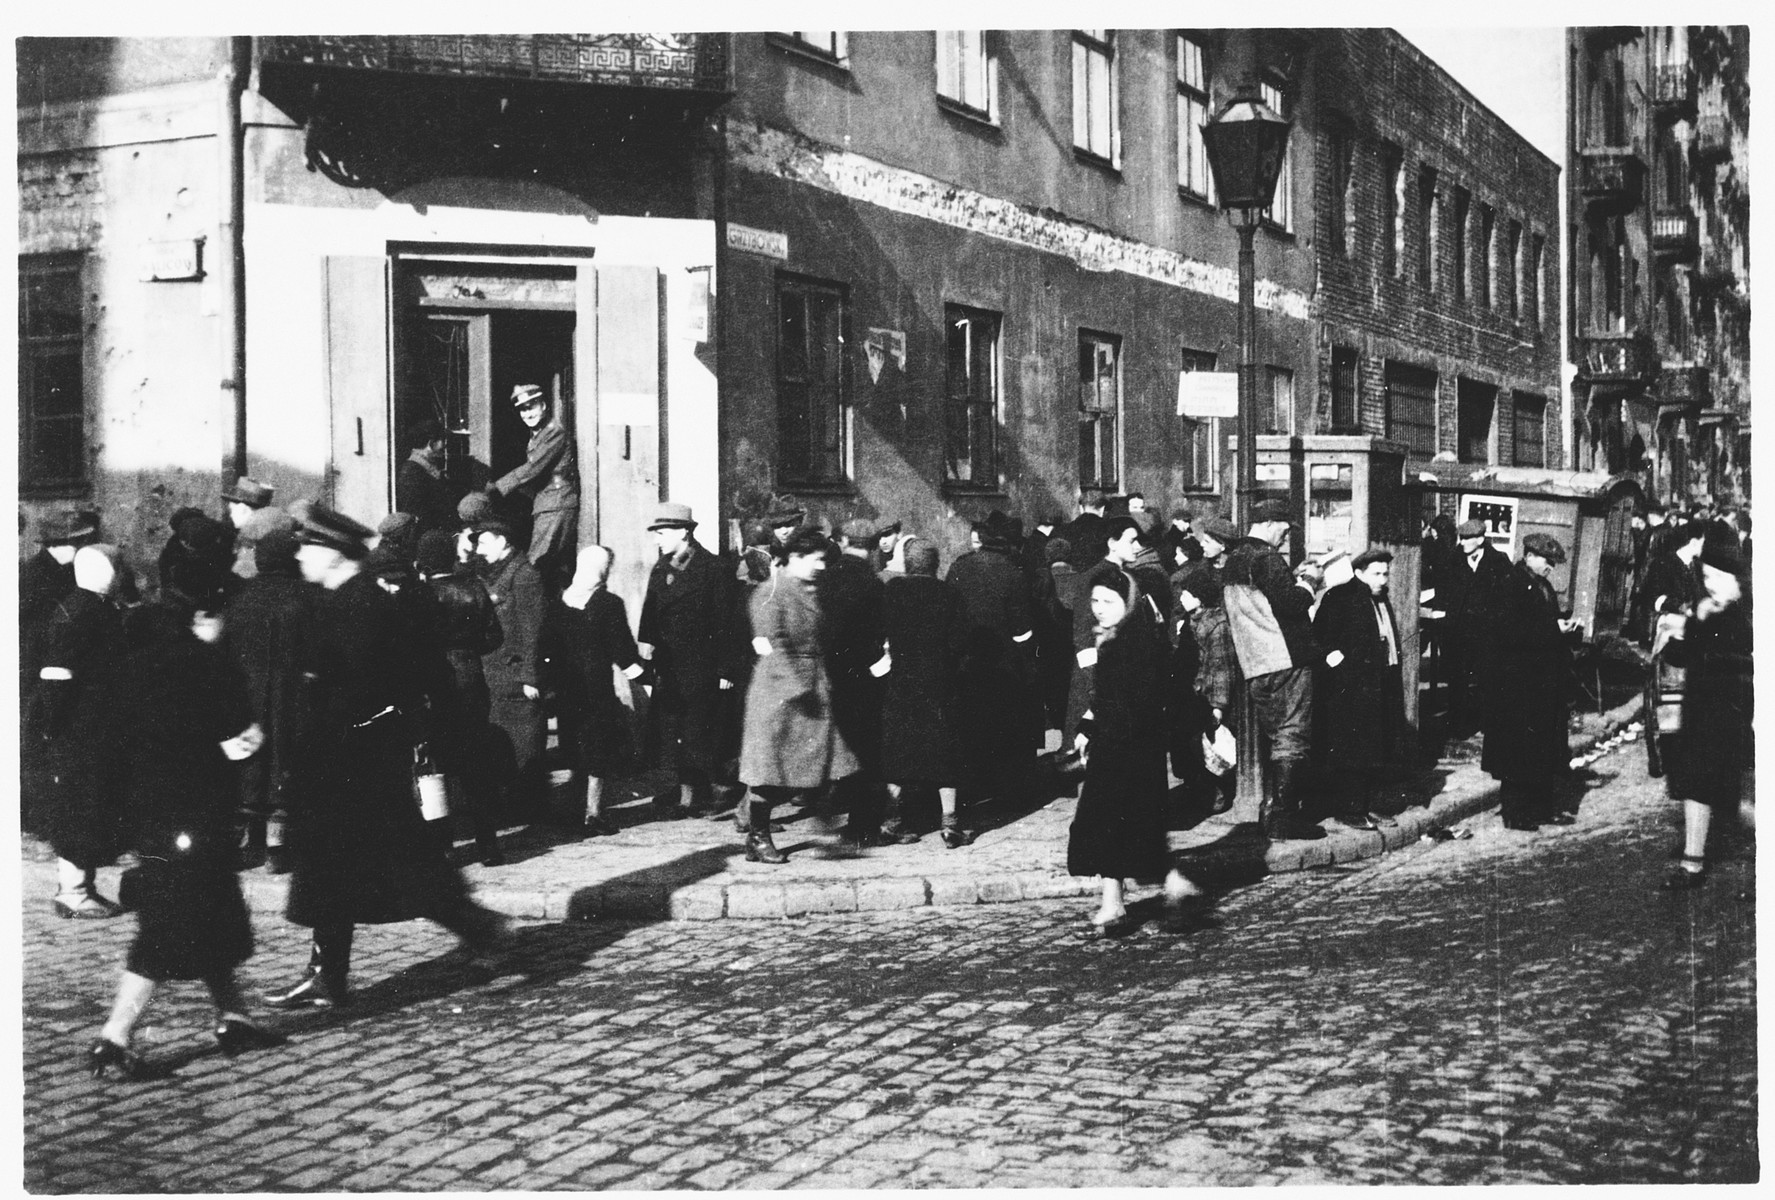 Jews wearing armbands cross a busy intersection in the Warsaw ghetto.